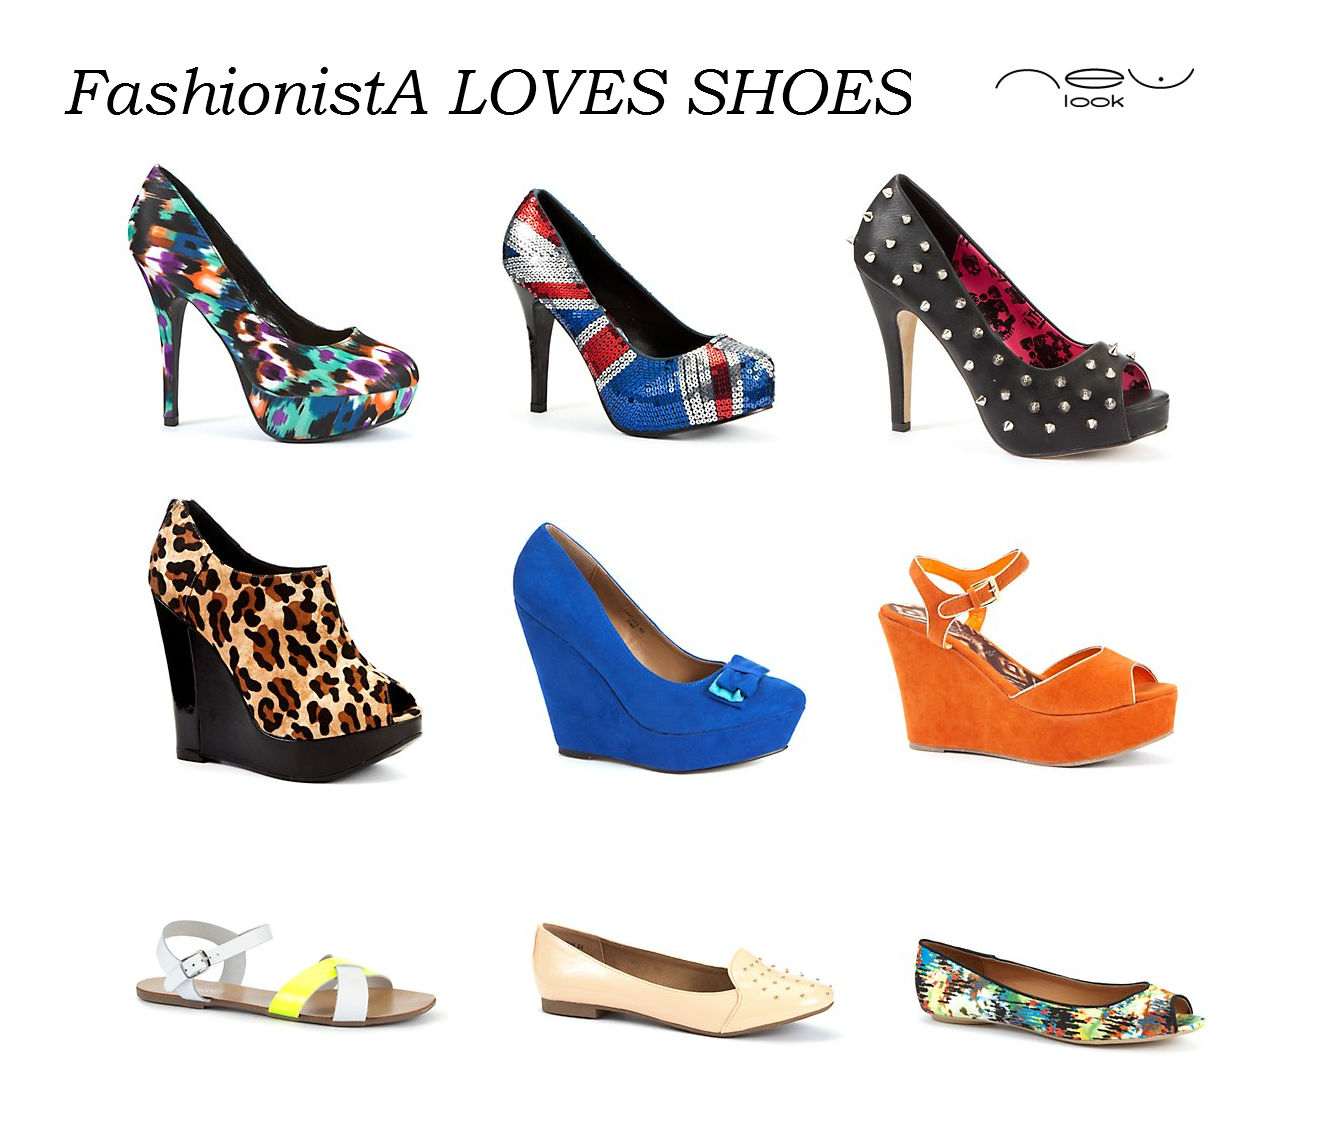 The Official Blog of FashionistA Cosmetics: Saturday Shoe Lust: New Look